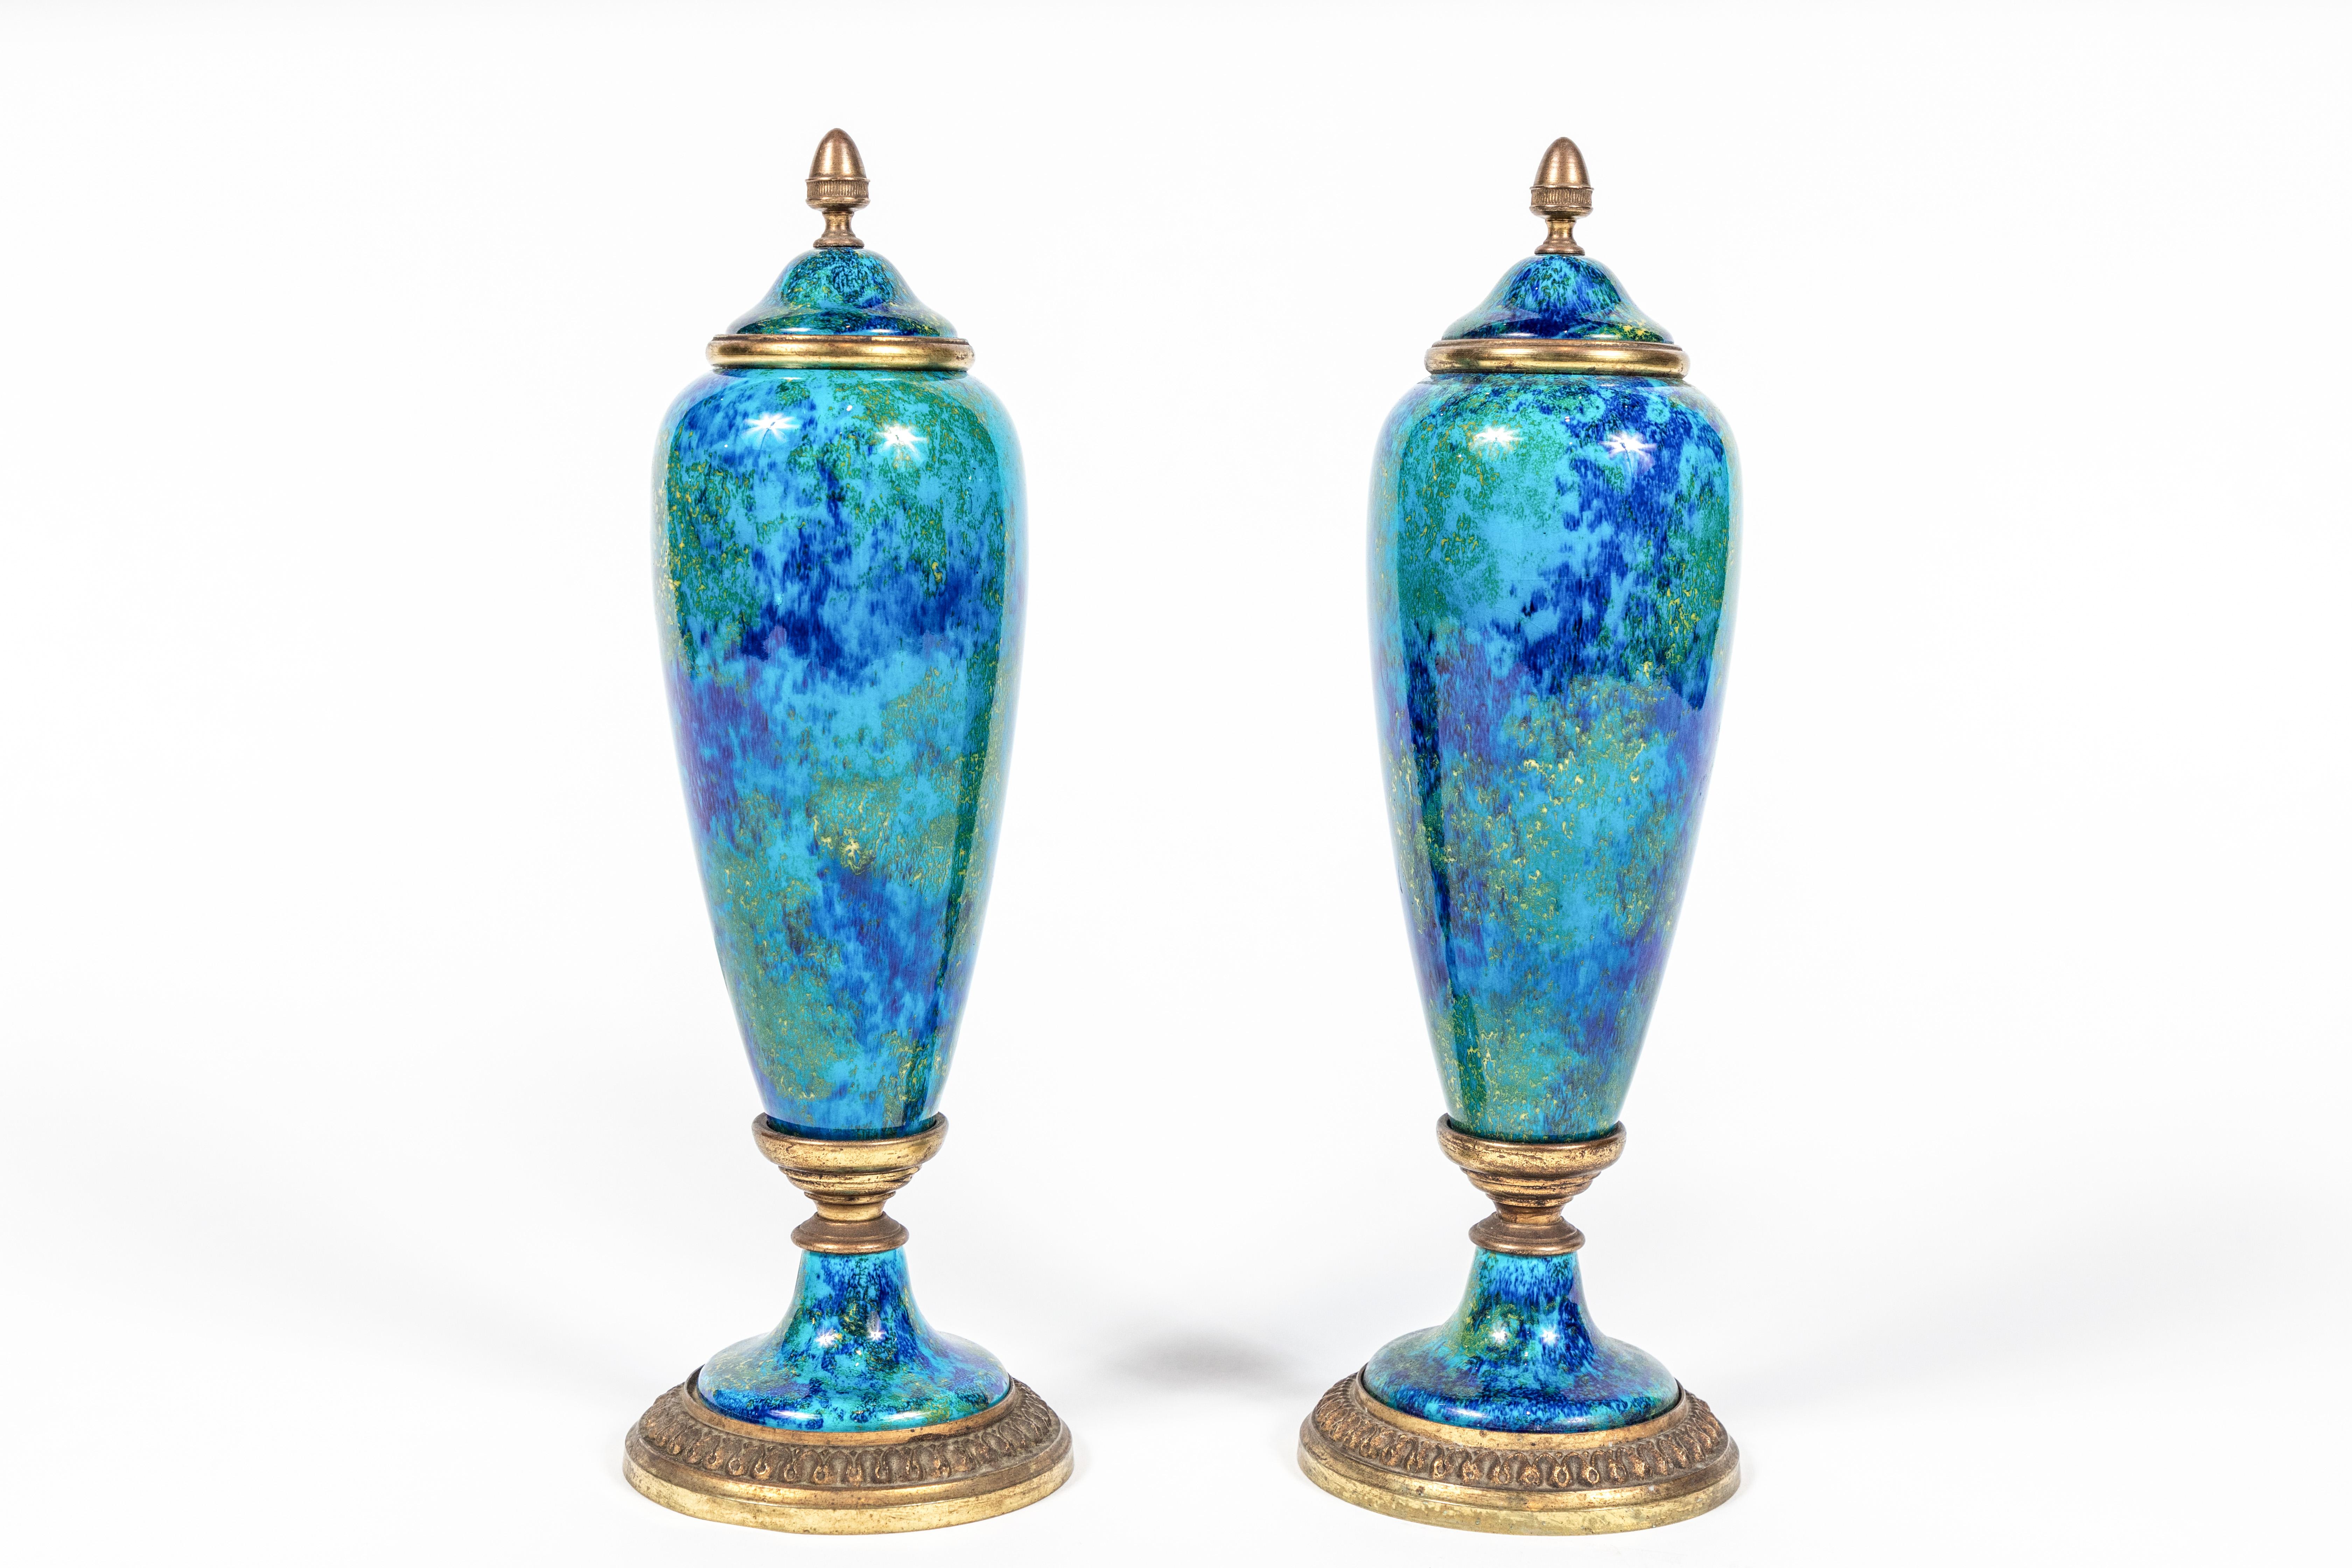 Striking pair of hand painted and glazed urns with gilt bronze mounts. Marked 